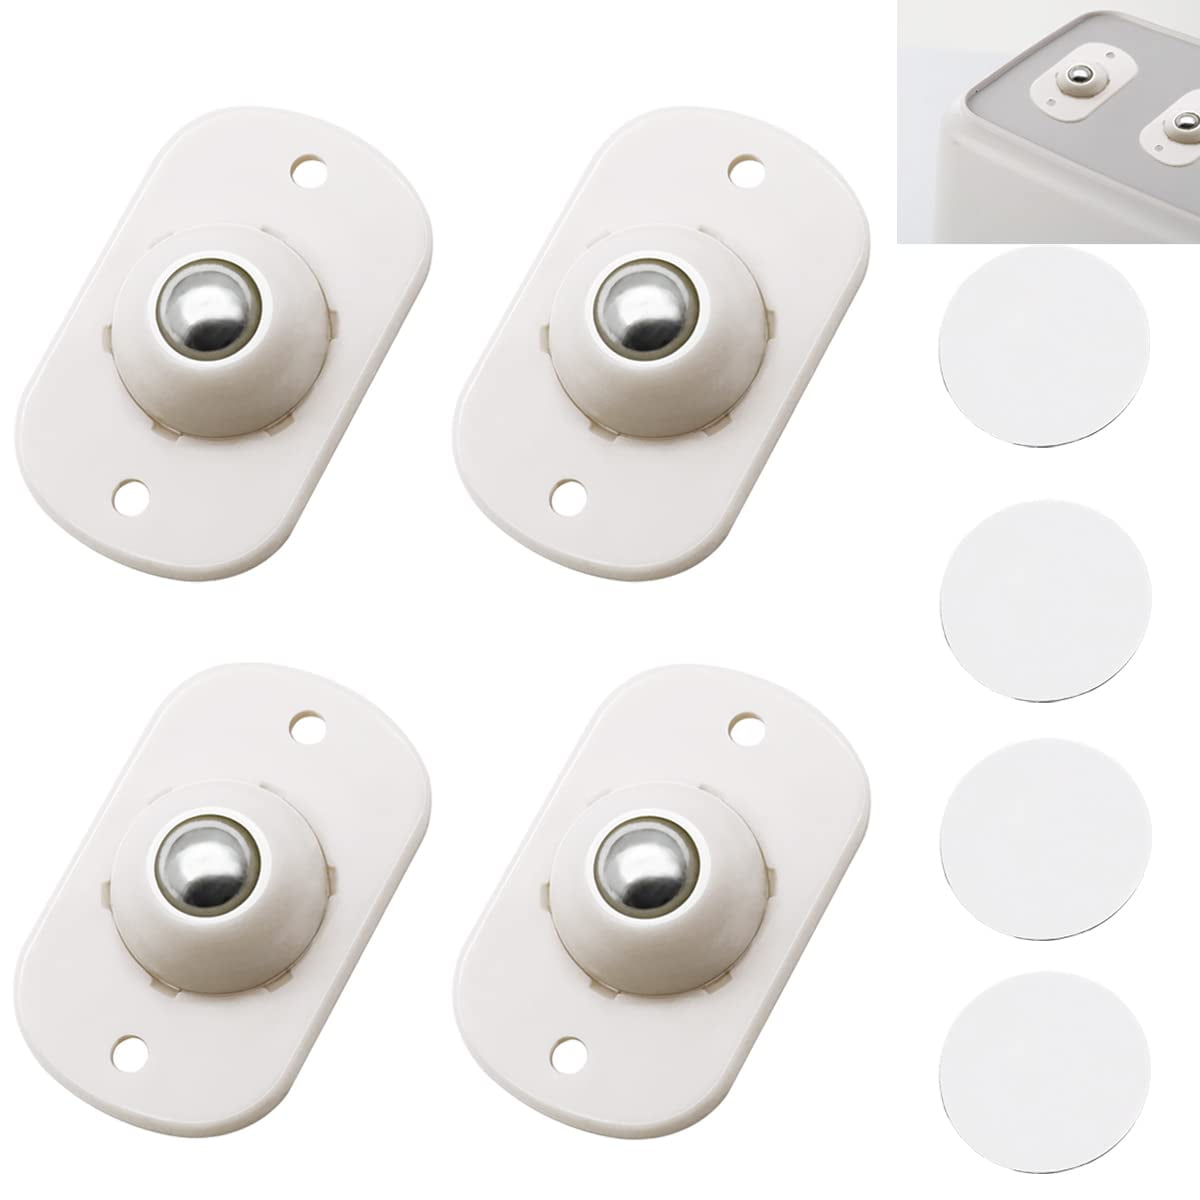 Self Adhesive Caster Wheels Mini Swivel Wheels Stainless Steel Paste Universal Wheel 360 Degree Rotation Sticky Pulley for Bins Bottom Storage Box Furniture Trash Can 24, White 